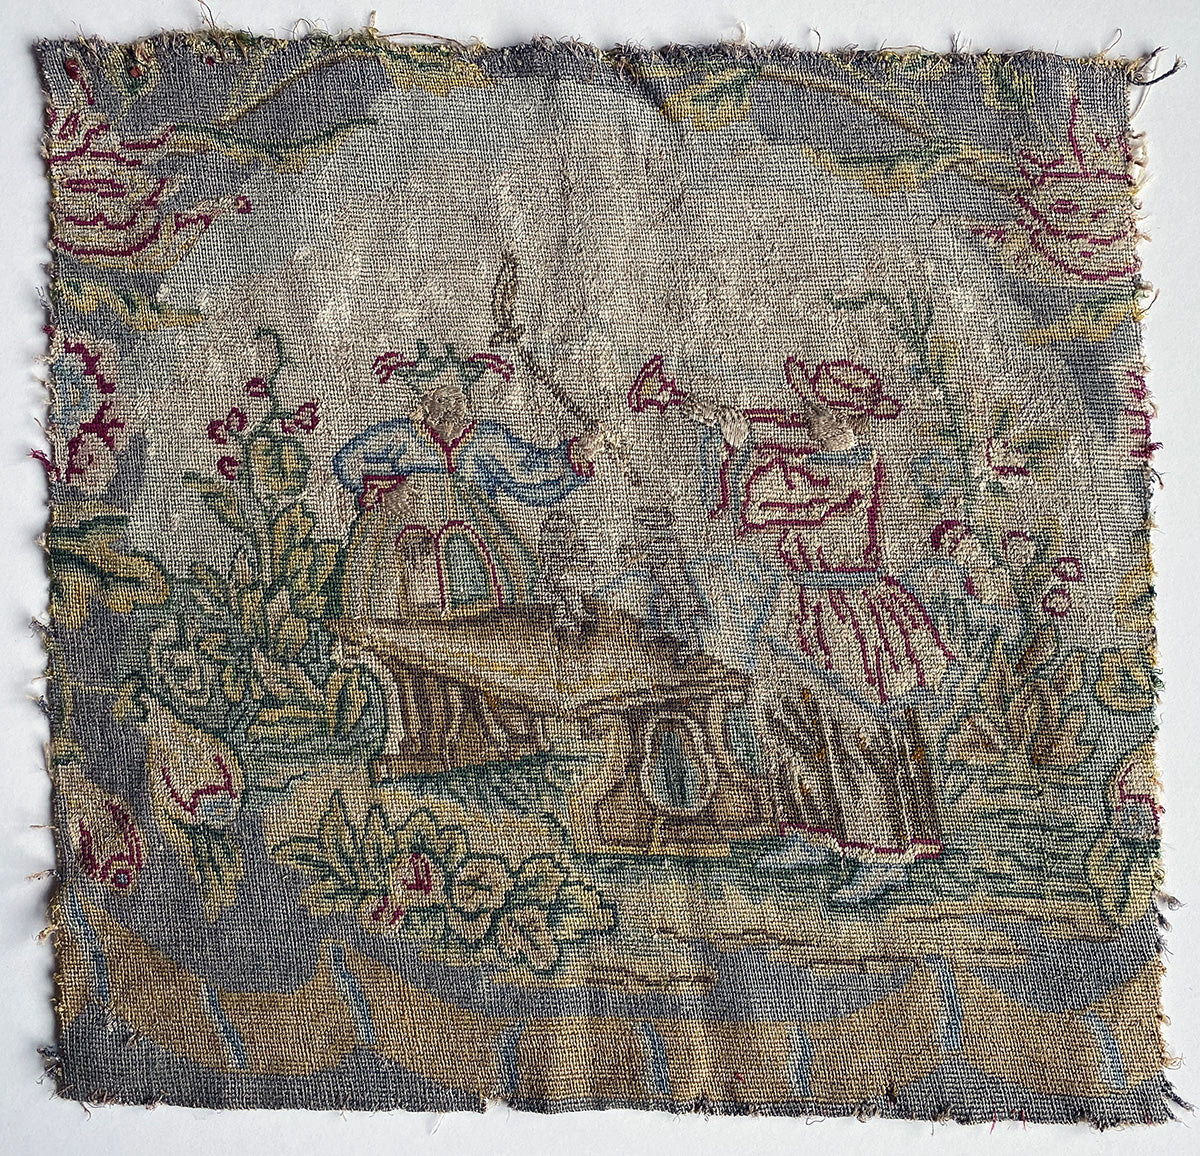 Pair Antique Silk Embroidery Tapestry Panels, Ready for Making Pillows - Late 1700s to Early 1800s